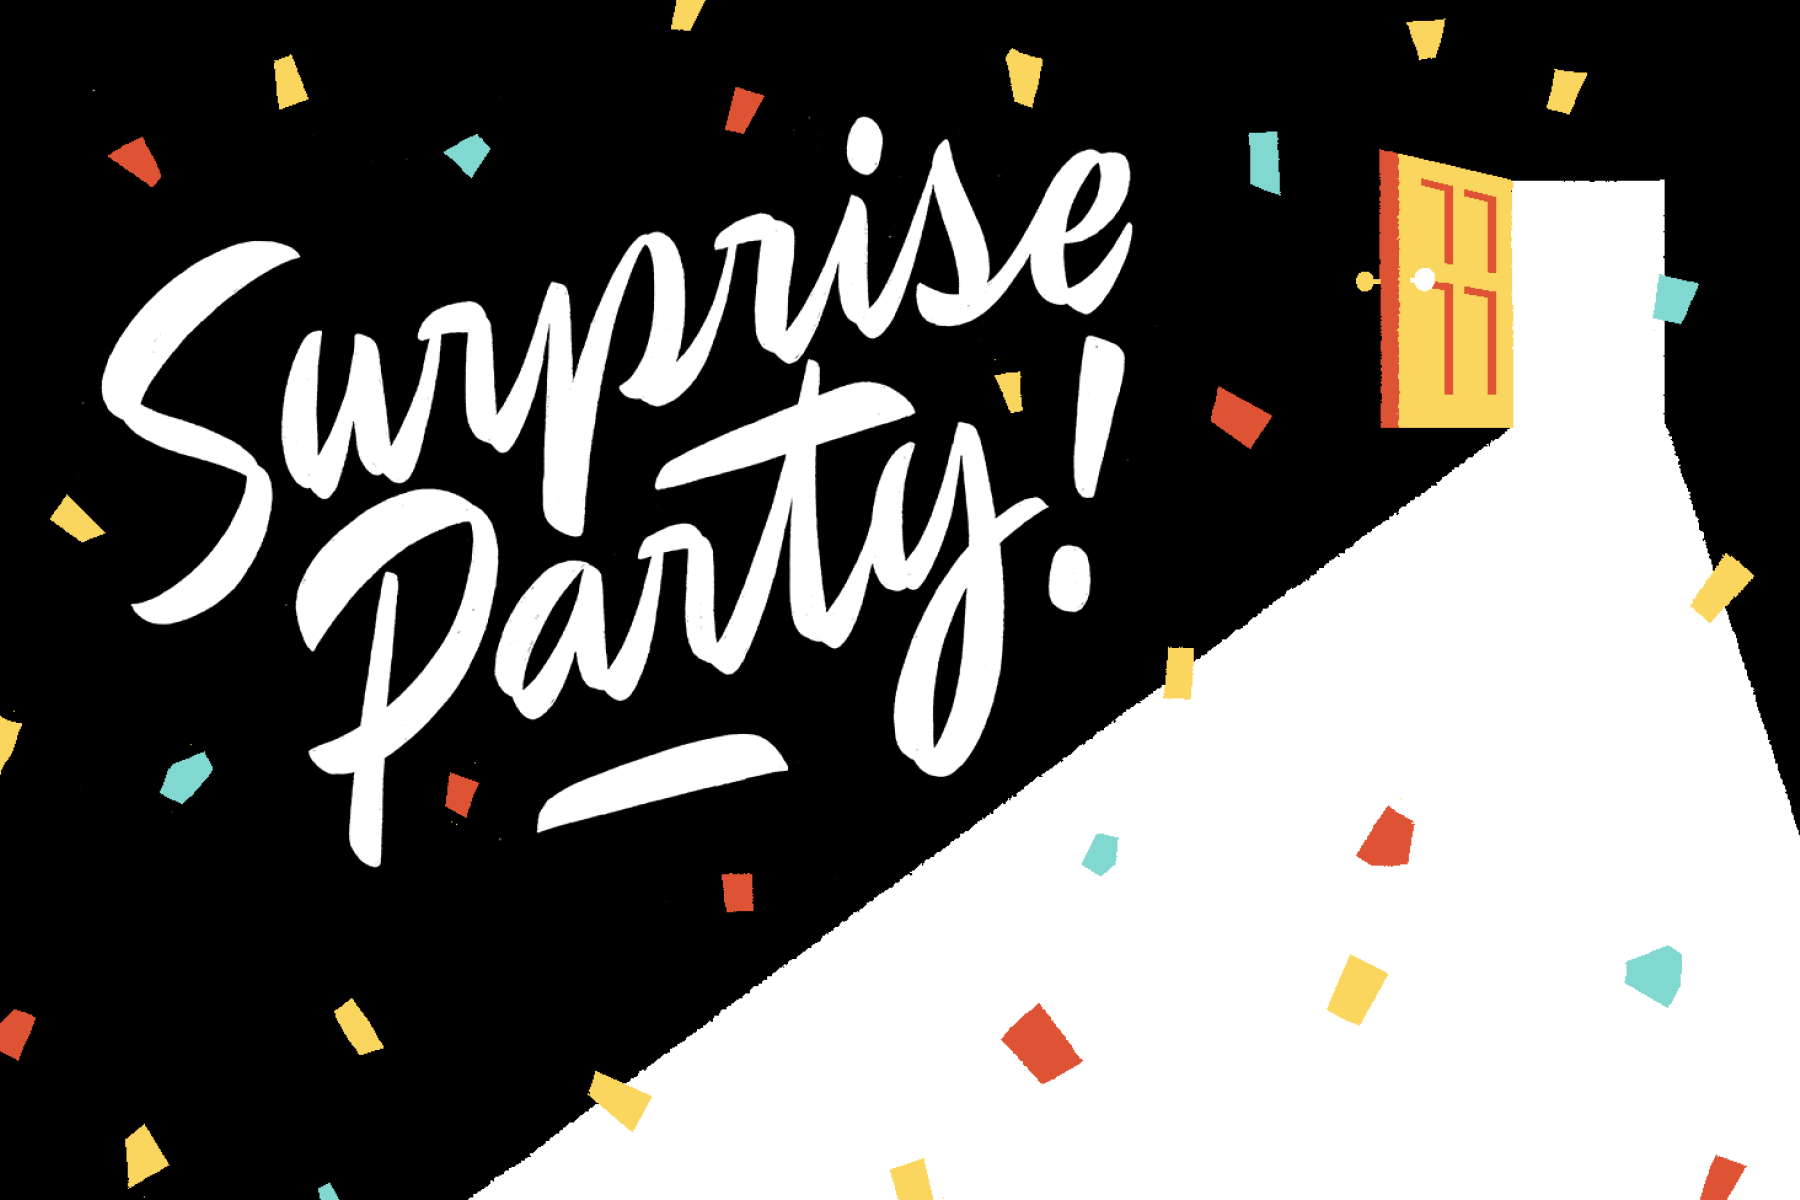 An illustration of a door opening into a dark room filled with confetti and the words “Surprise party!”